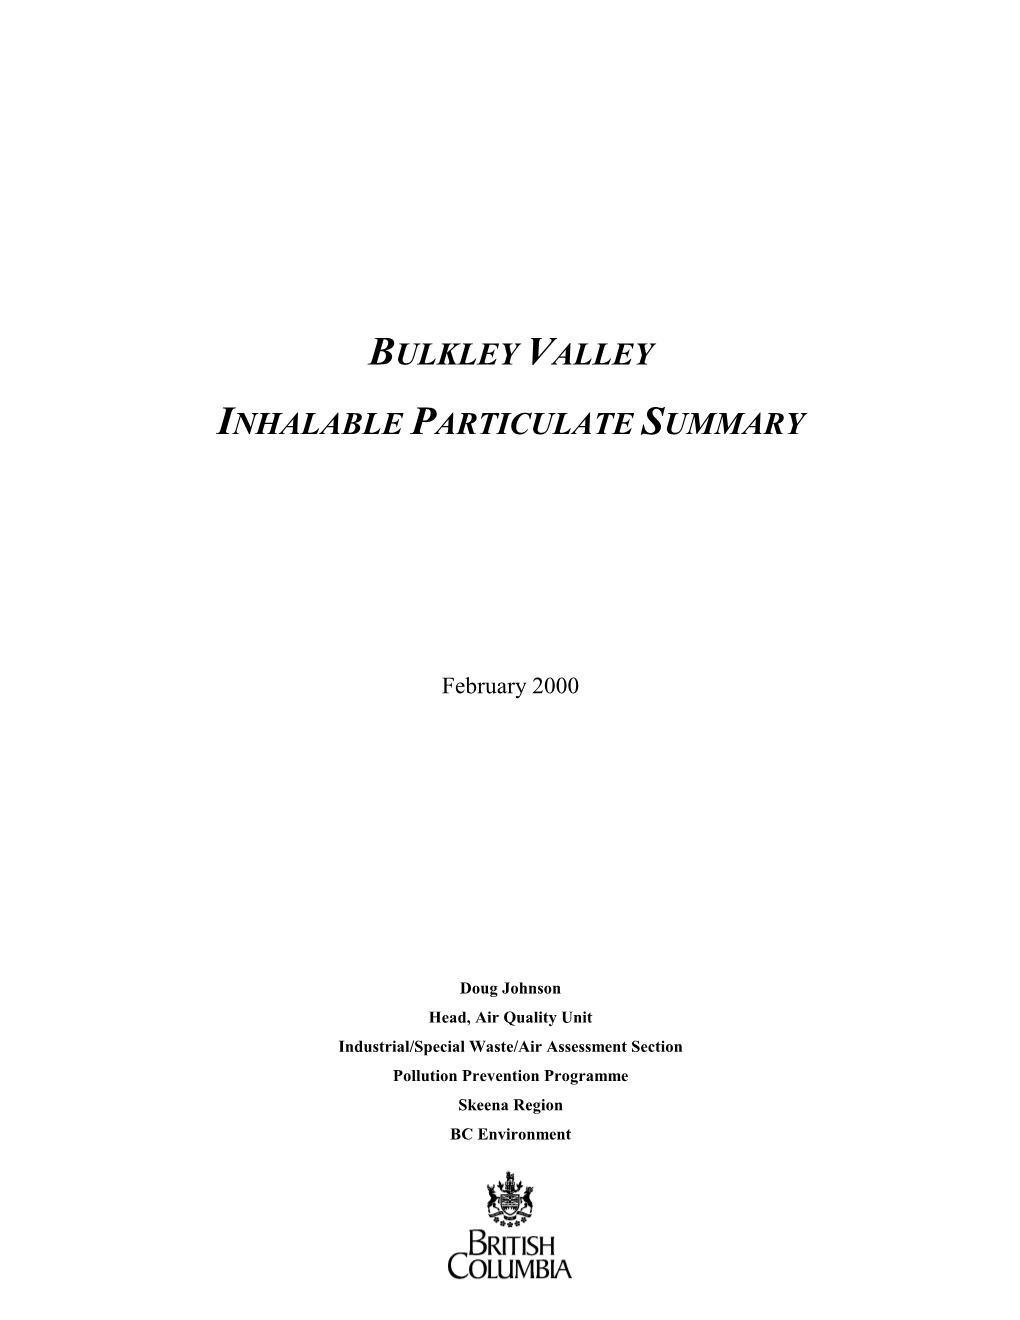 Bulkley Valley Inhalable Particulate Summary Is an Update, Completed in February 2000, of the Original Document Published in the Spring of 1998